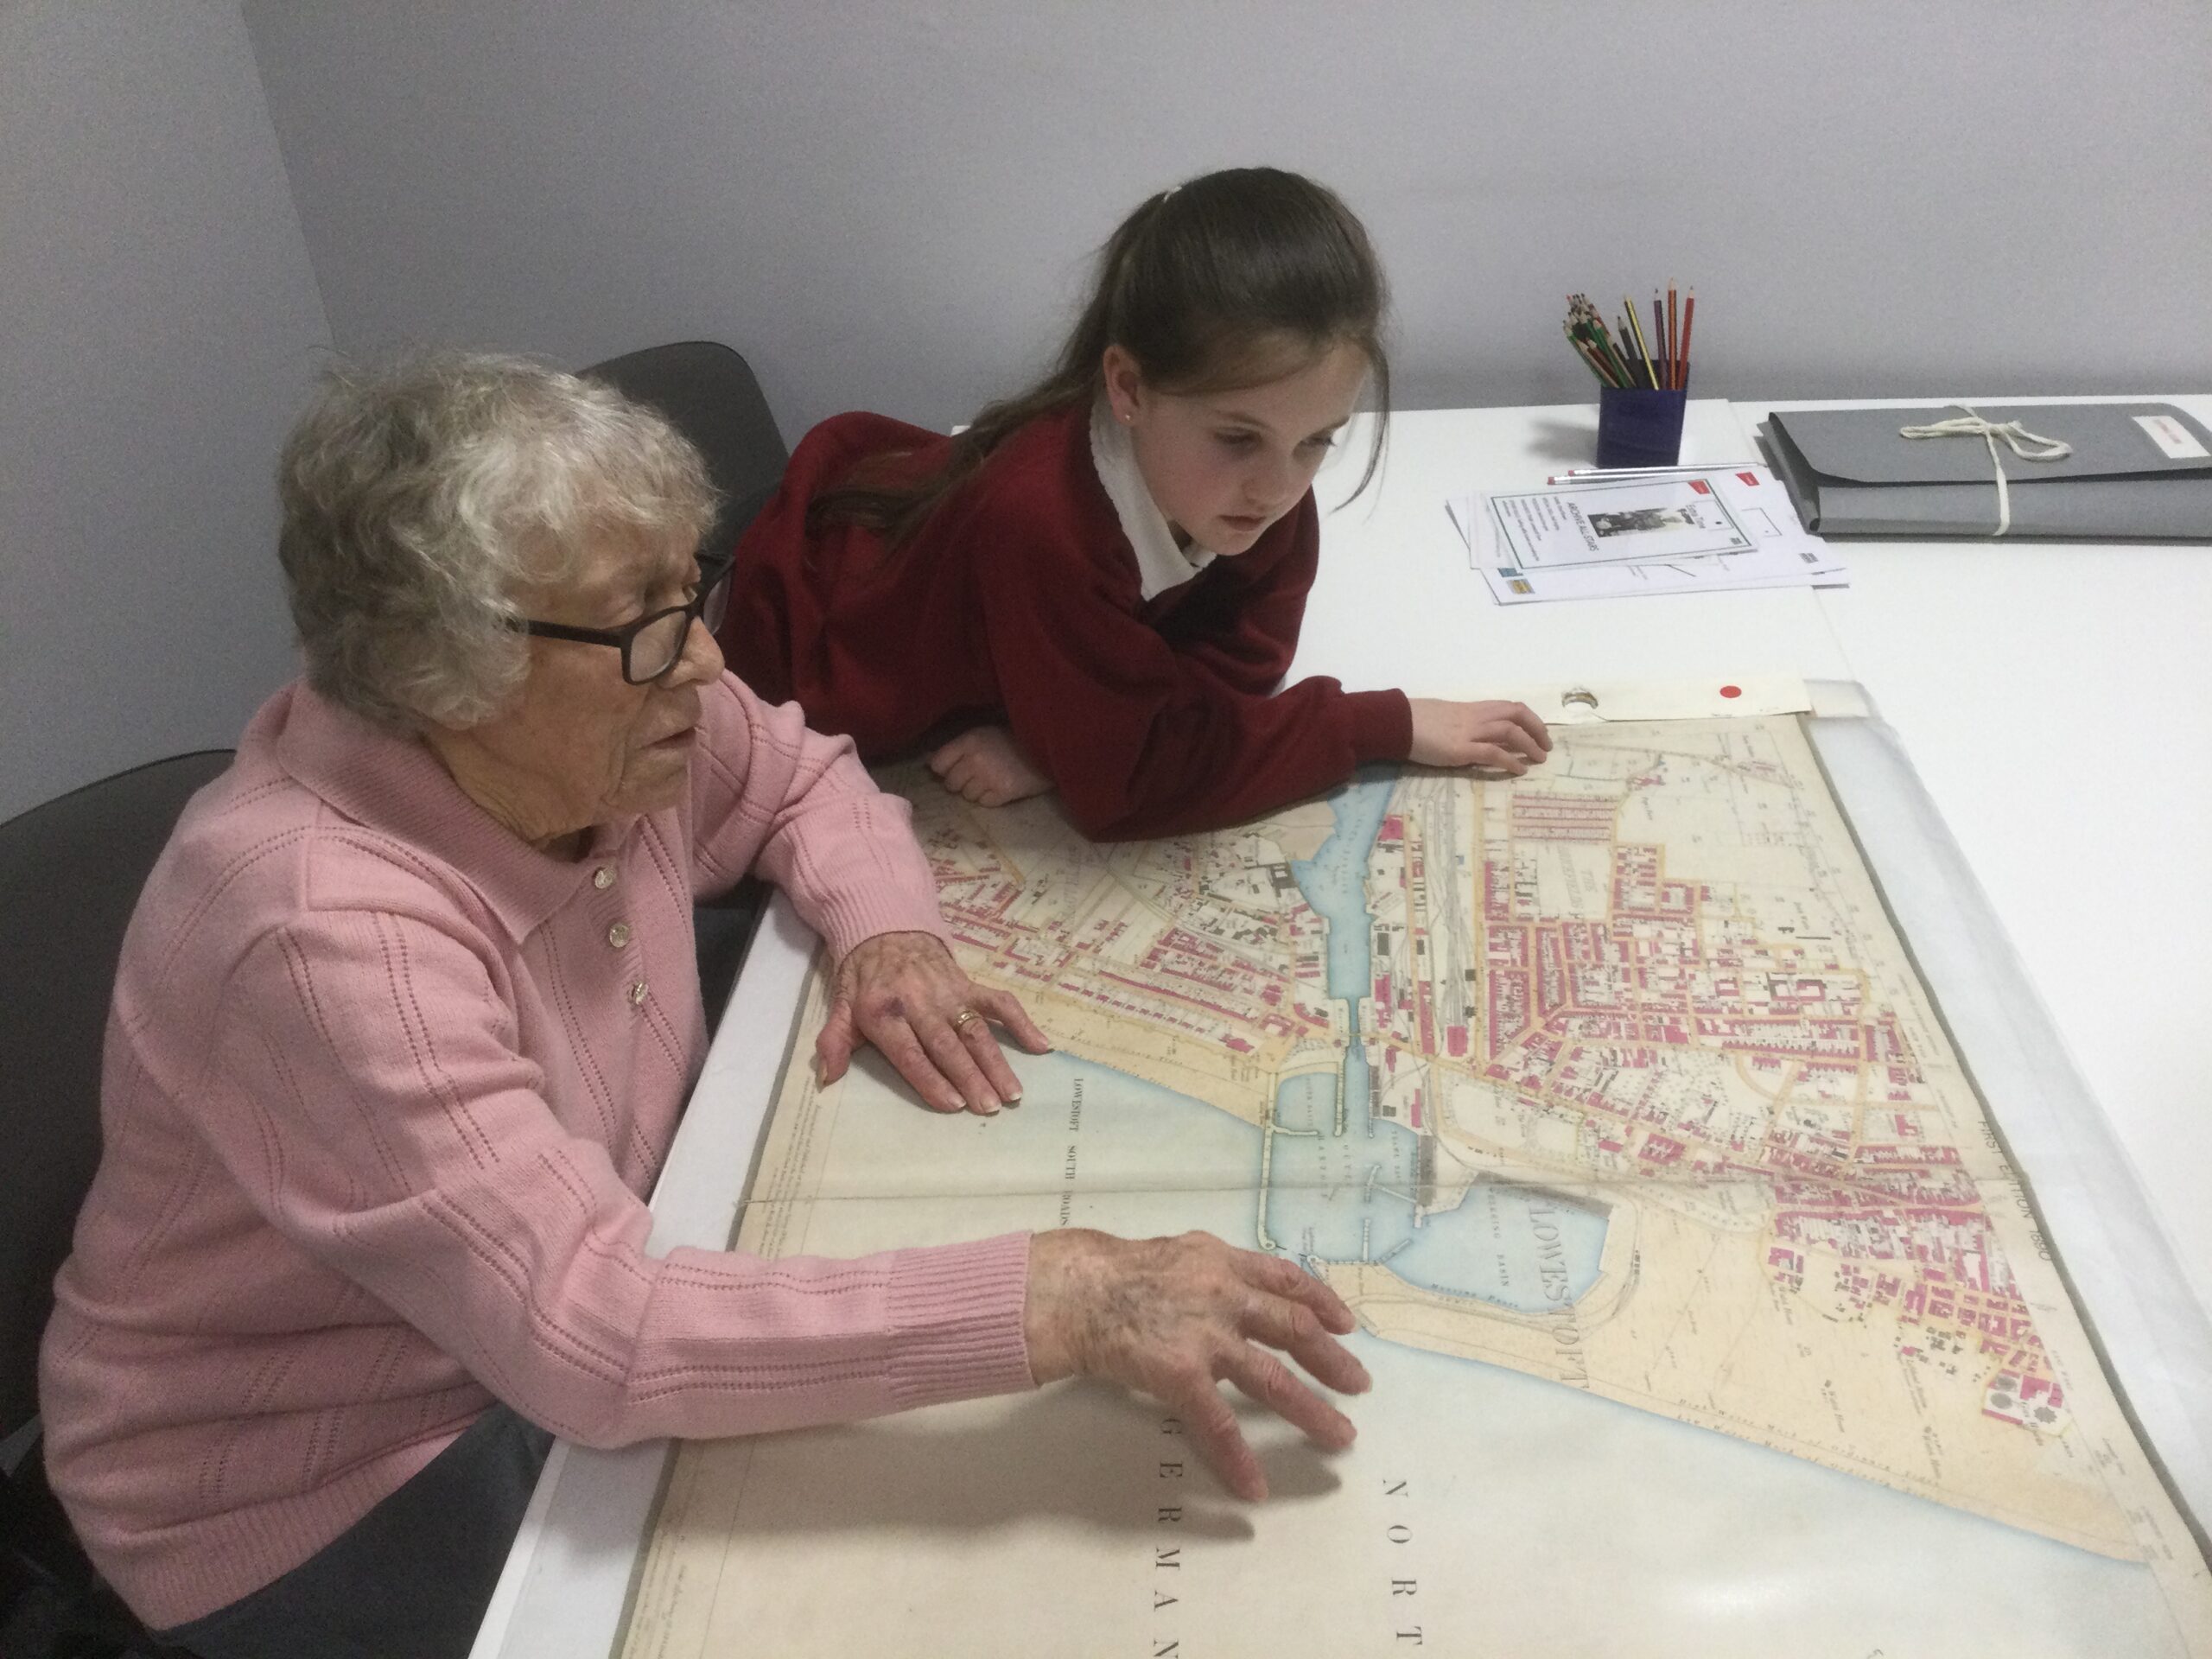 A school girl and woman looking intently at a street map of the town